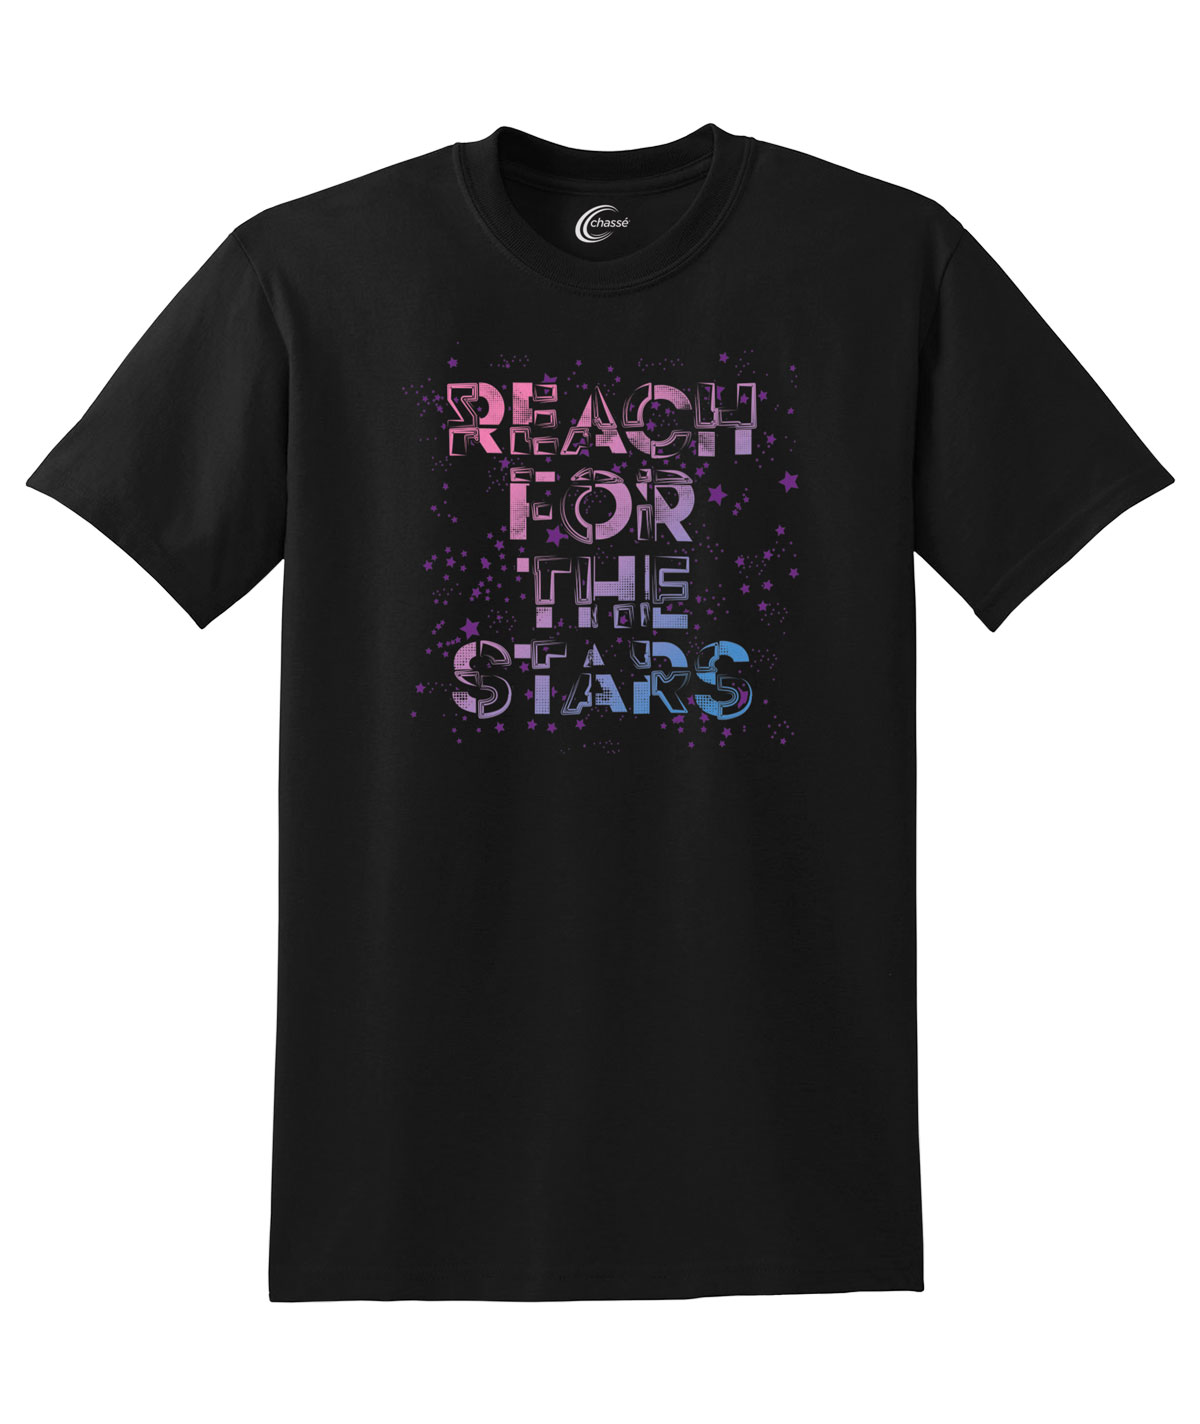 Chasse Reach For The Stars Tee